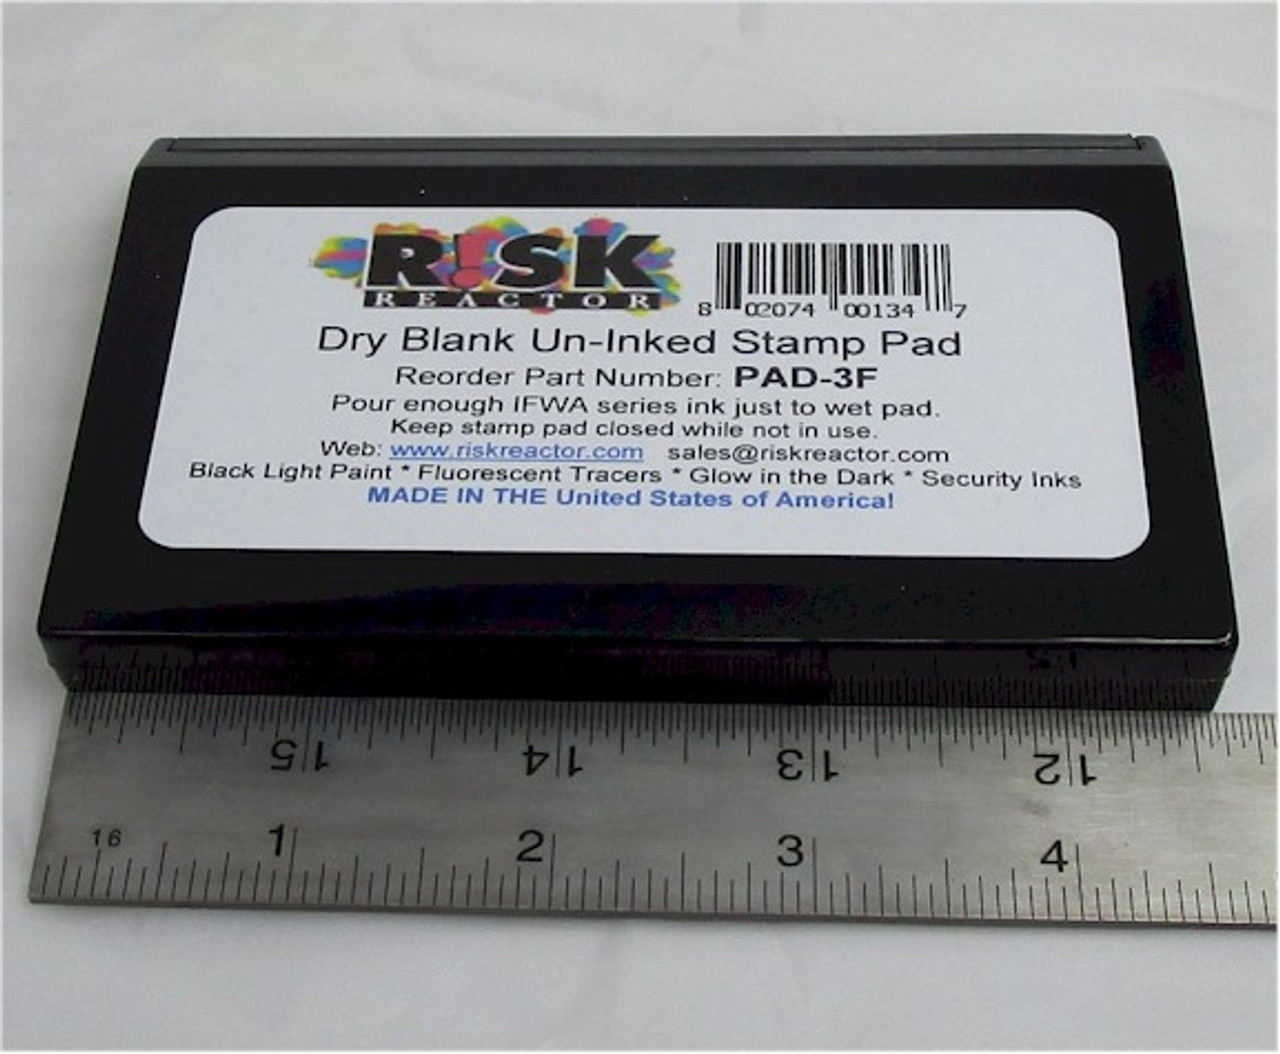 Infusion 2.25 x 3.5 Medium Stamp Pad for Rubber Stamps, Your Go to  Medium-Sized Ink Pad for Bright Color, Even Coverage and Durability (Black Stamp  Pad) 